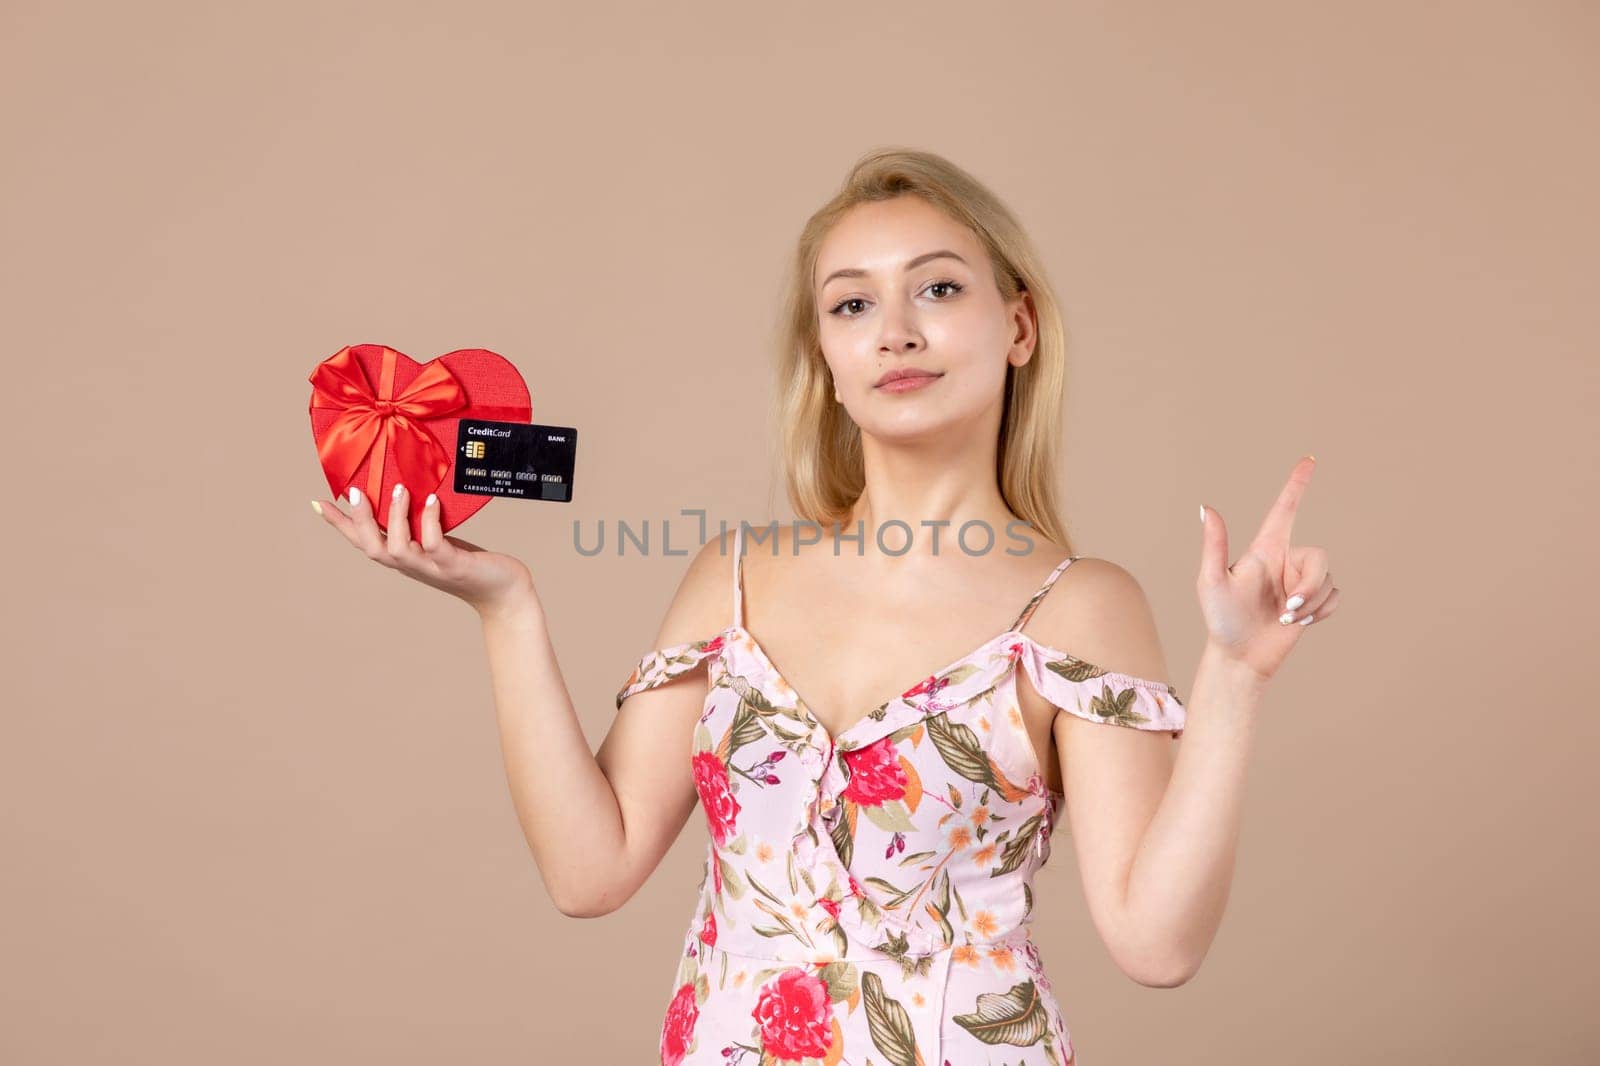 front view young female posing with red heart shaped present and bank card on brown background feminine money march sensual equality woman